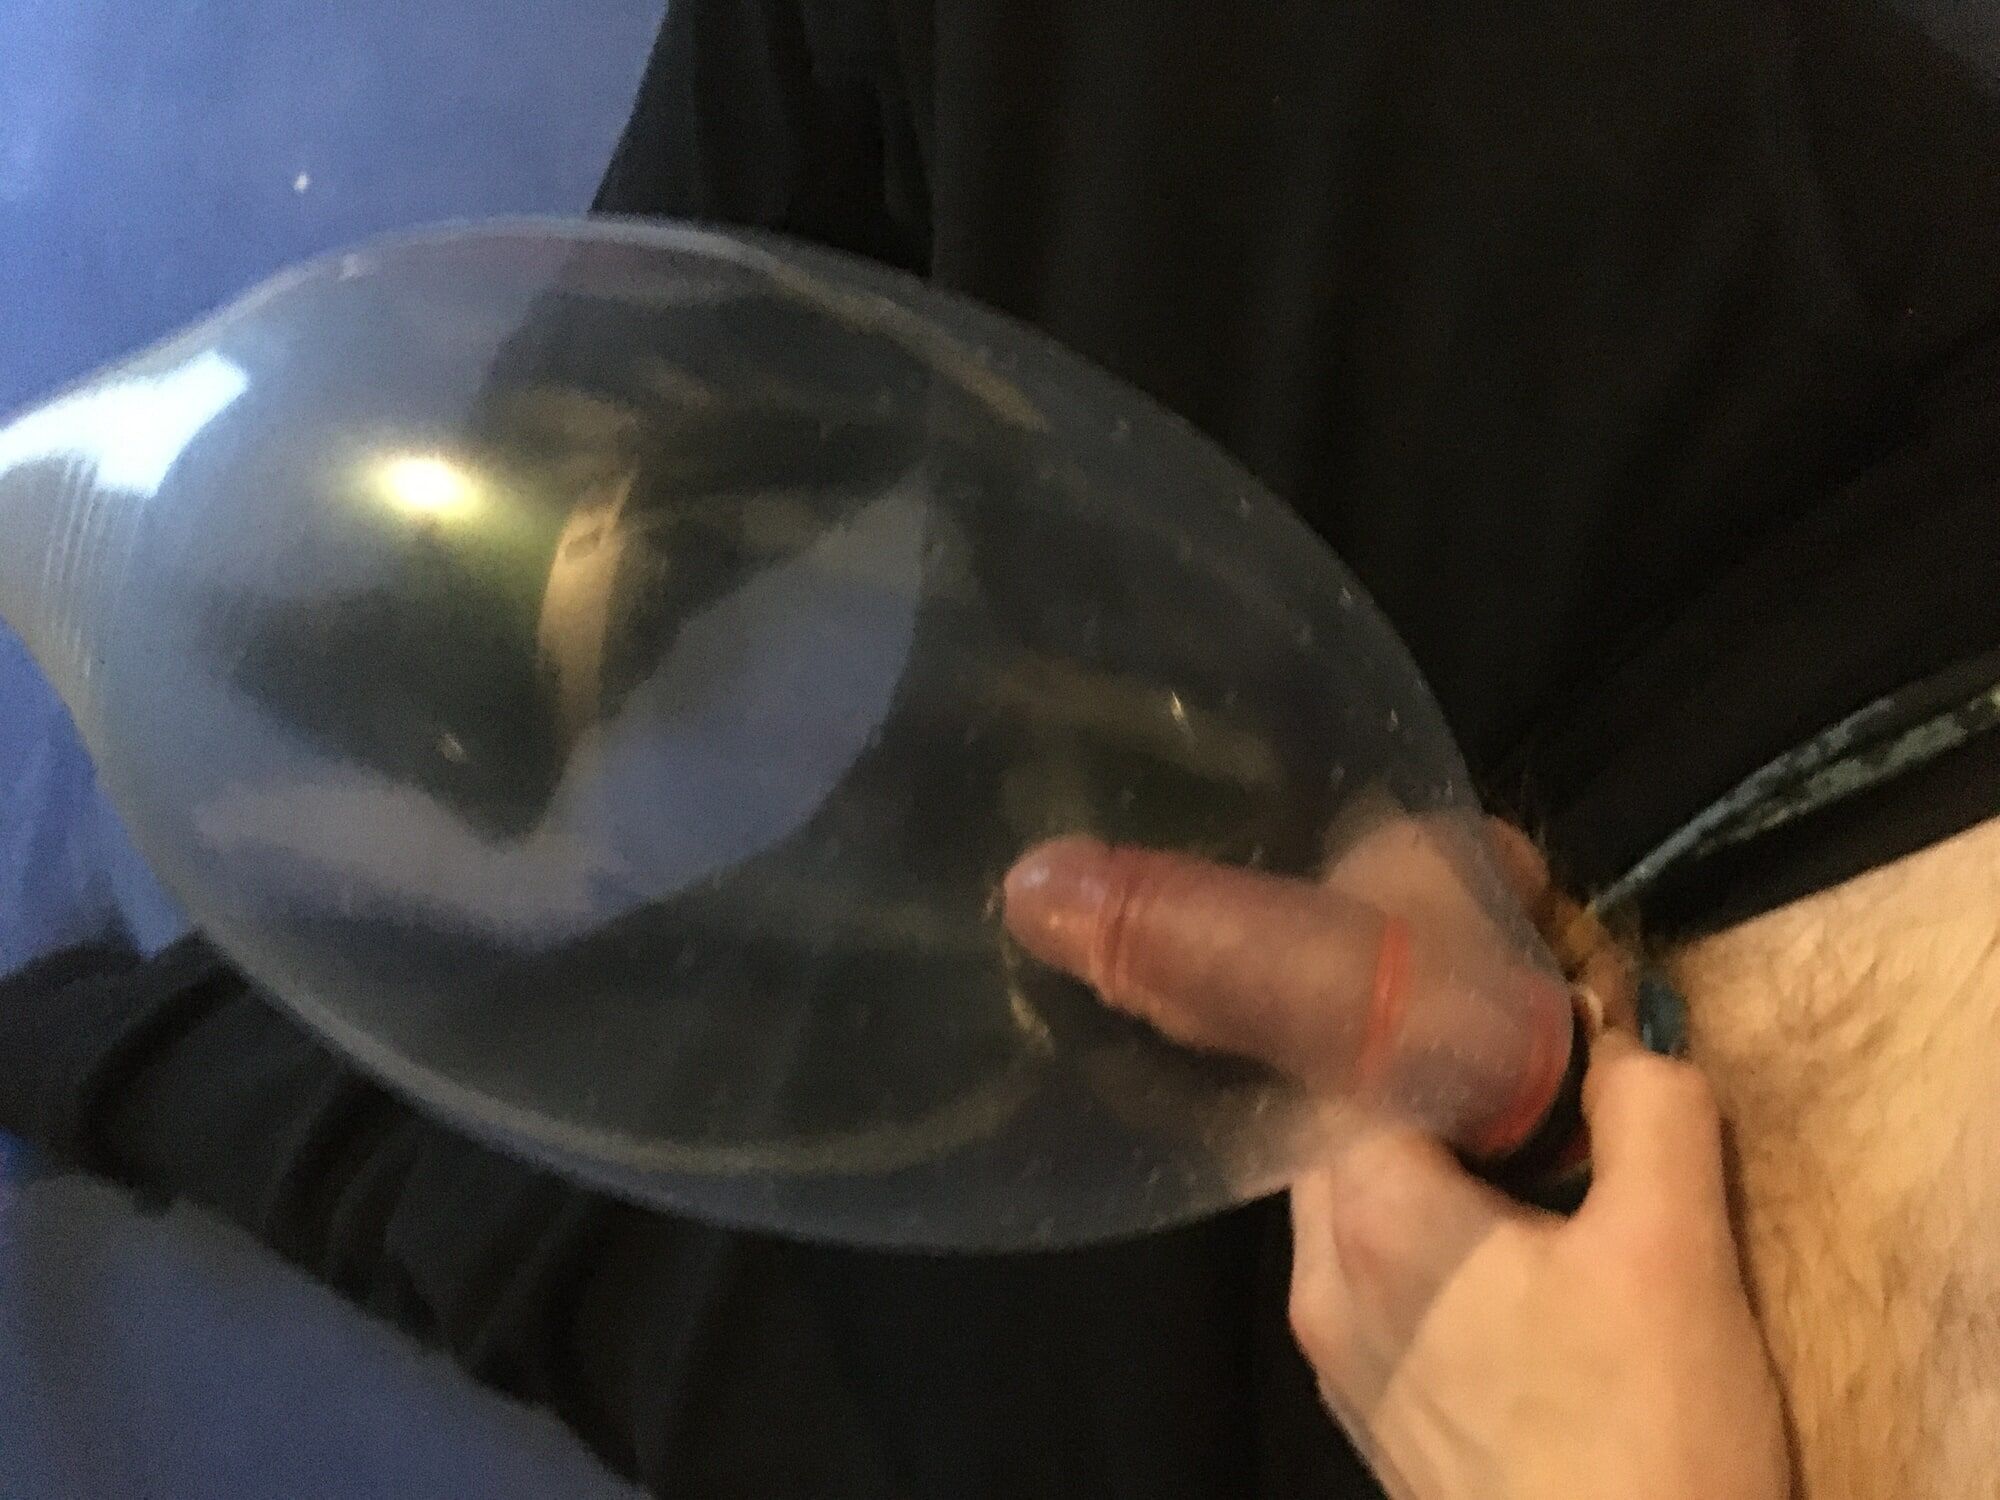  Haired Dick And Balls With Rubber Bands Condom Ballon  fuck #40